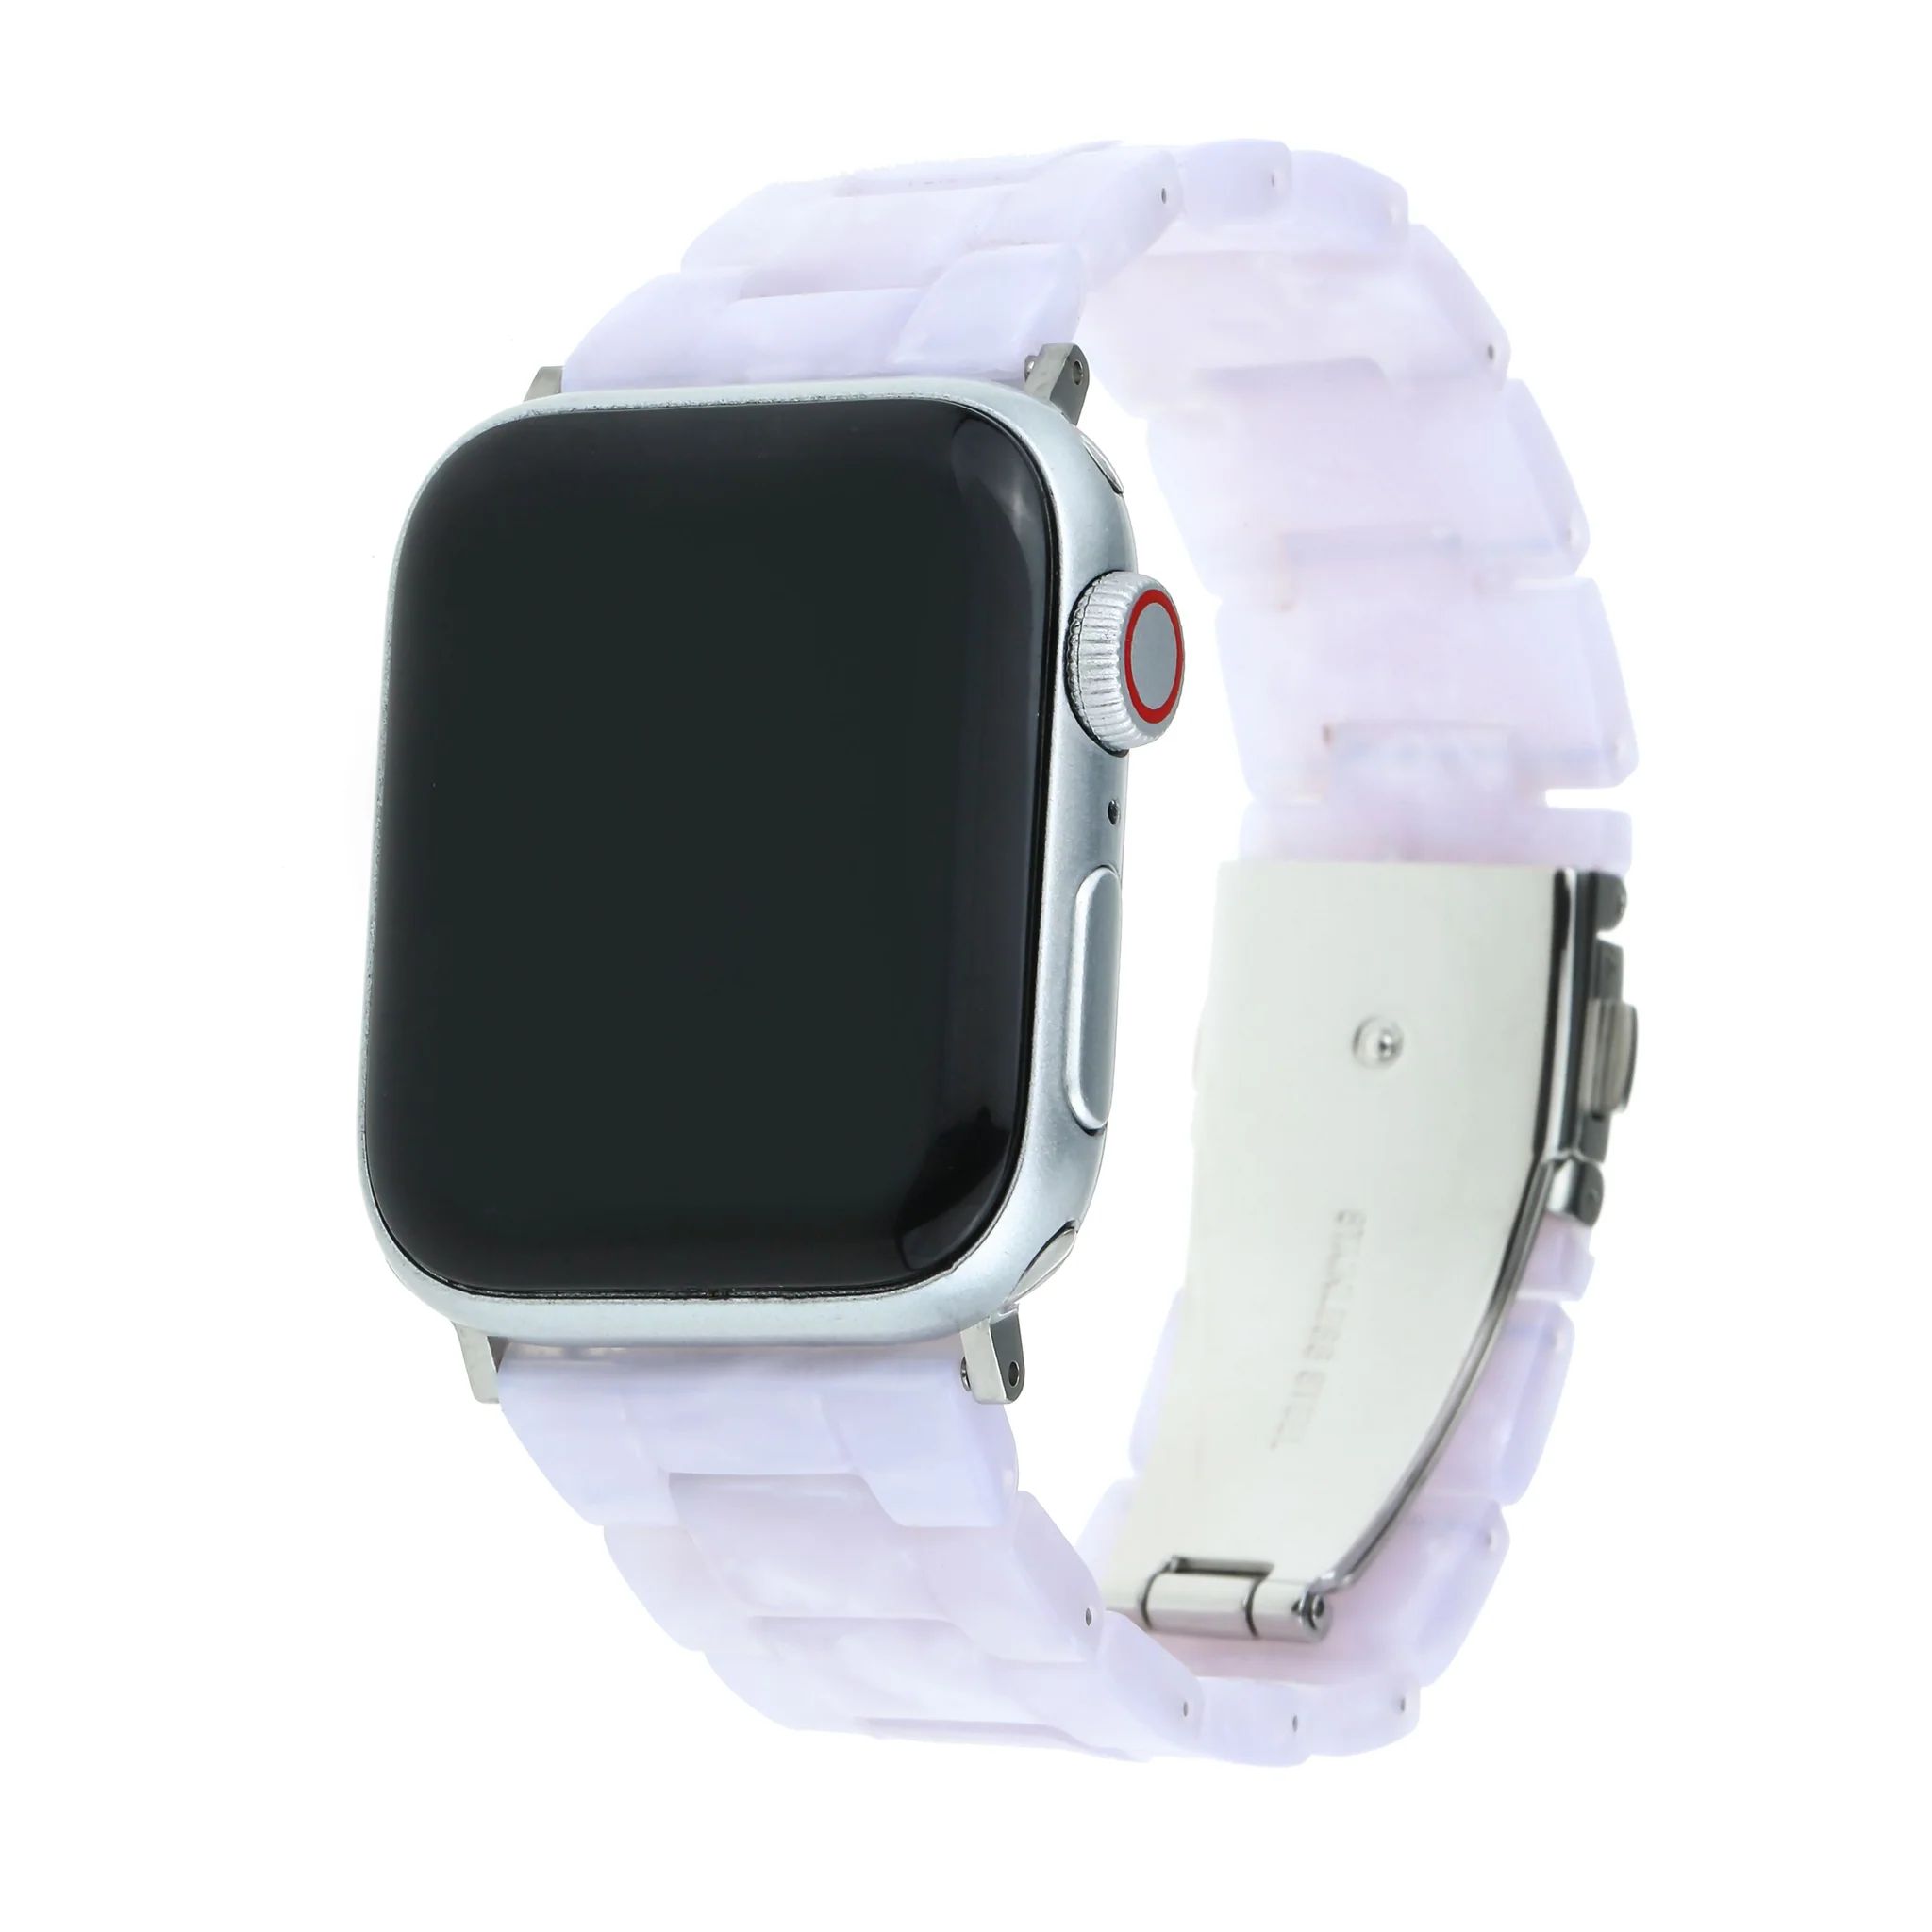 Acrylic Apple Watch Strap in Cloud Pink | Victoria Emerson